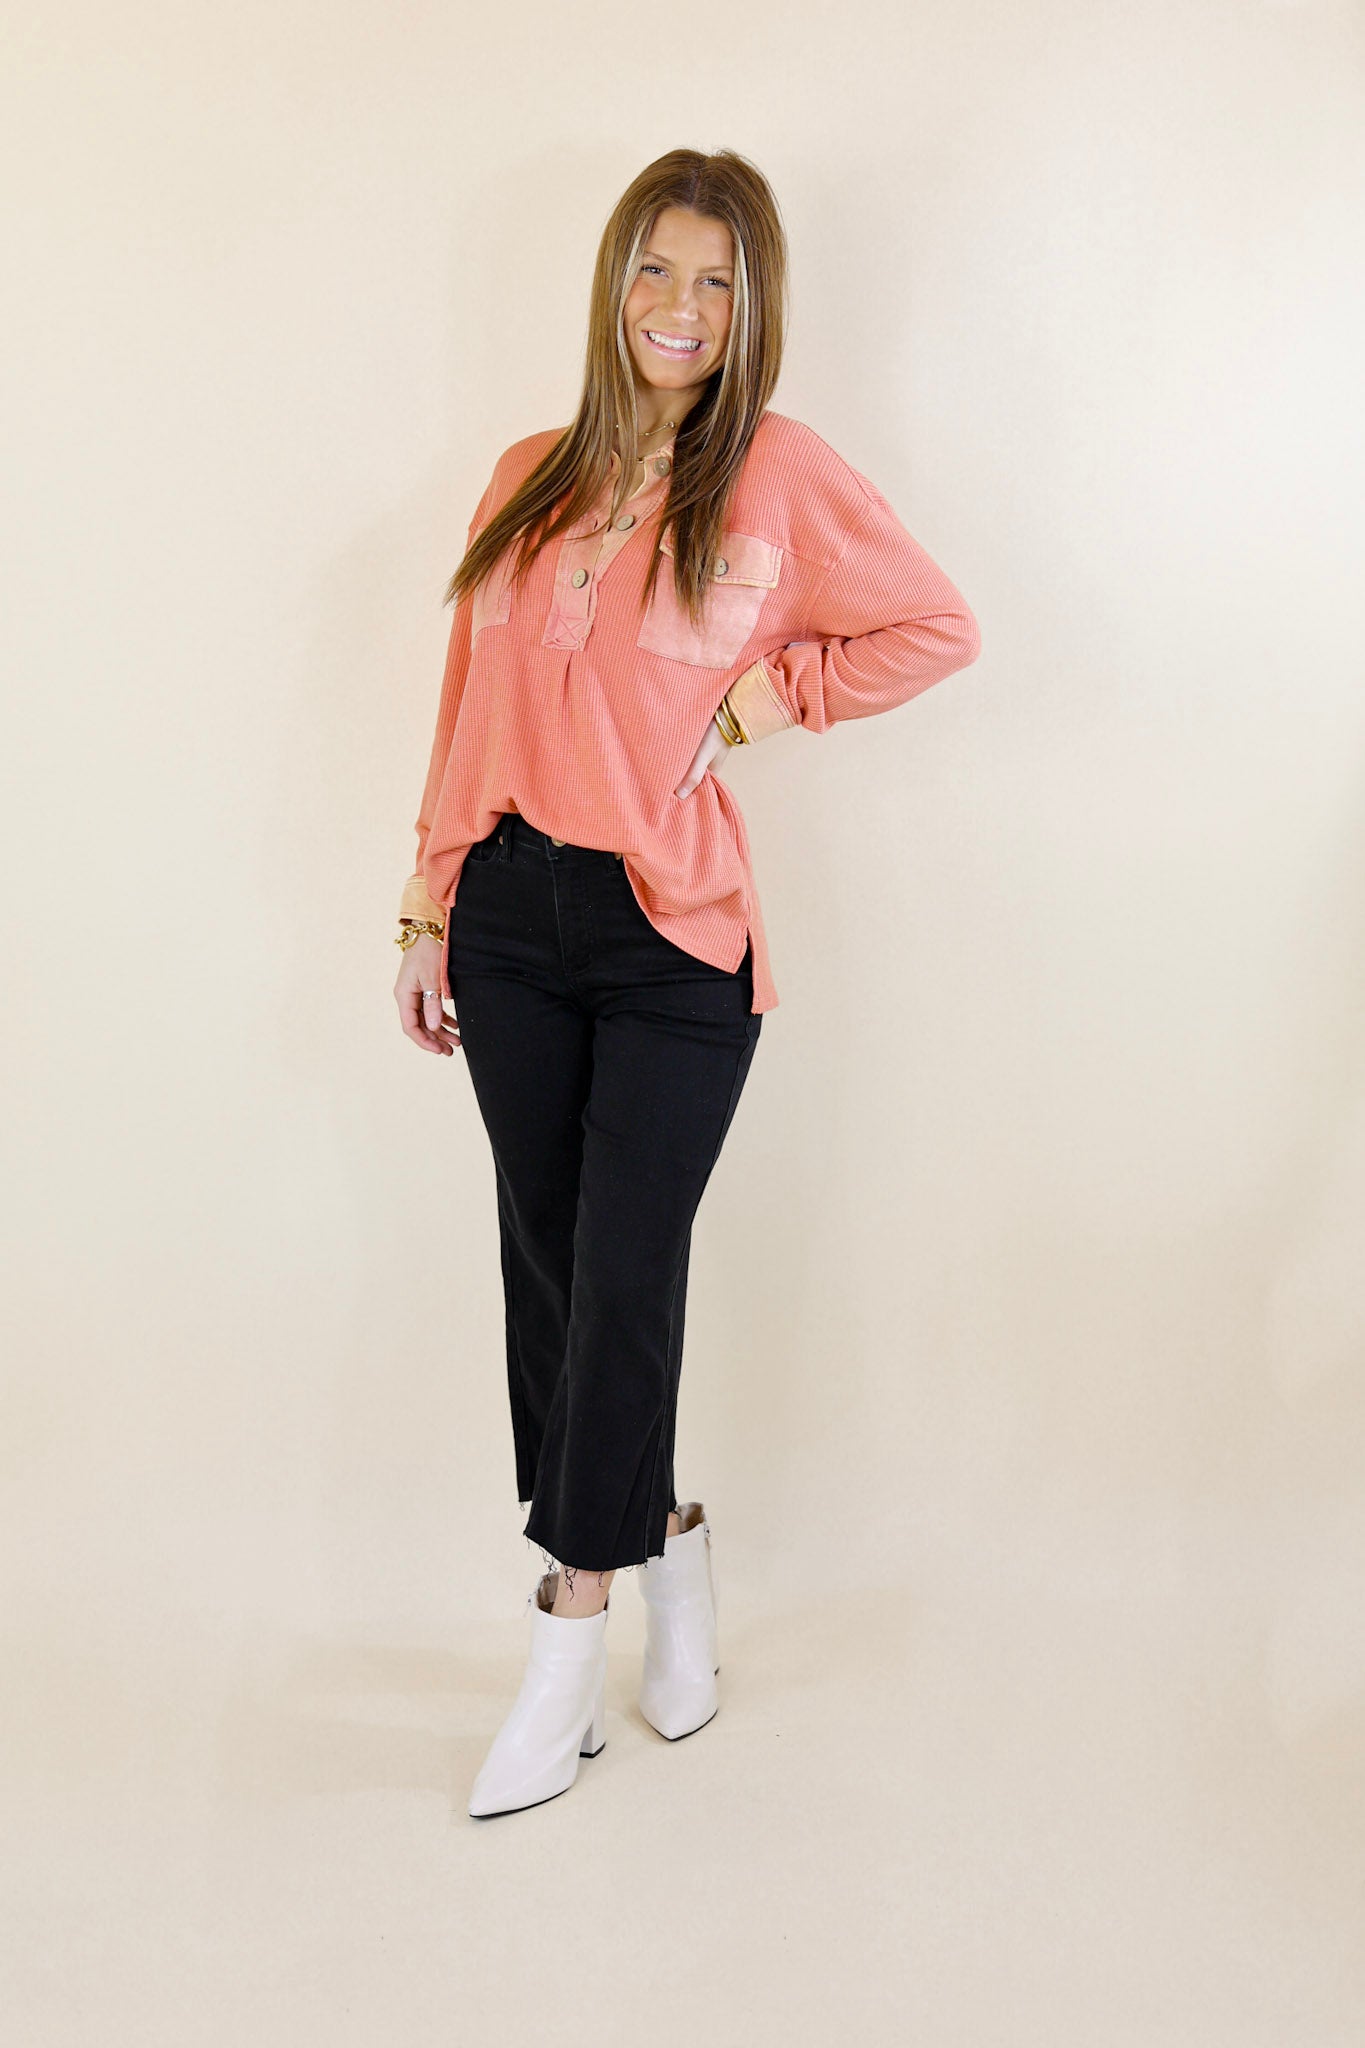 Cozy Welcome Waffle Knit Collared Top with Long Sleeves in Coral Orange - Giddy Up Glamour Boutique